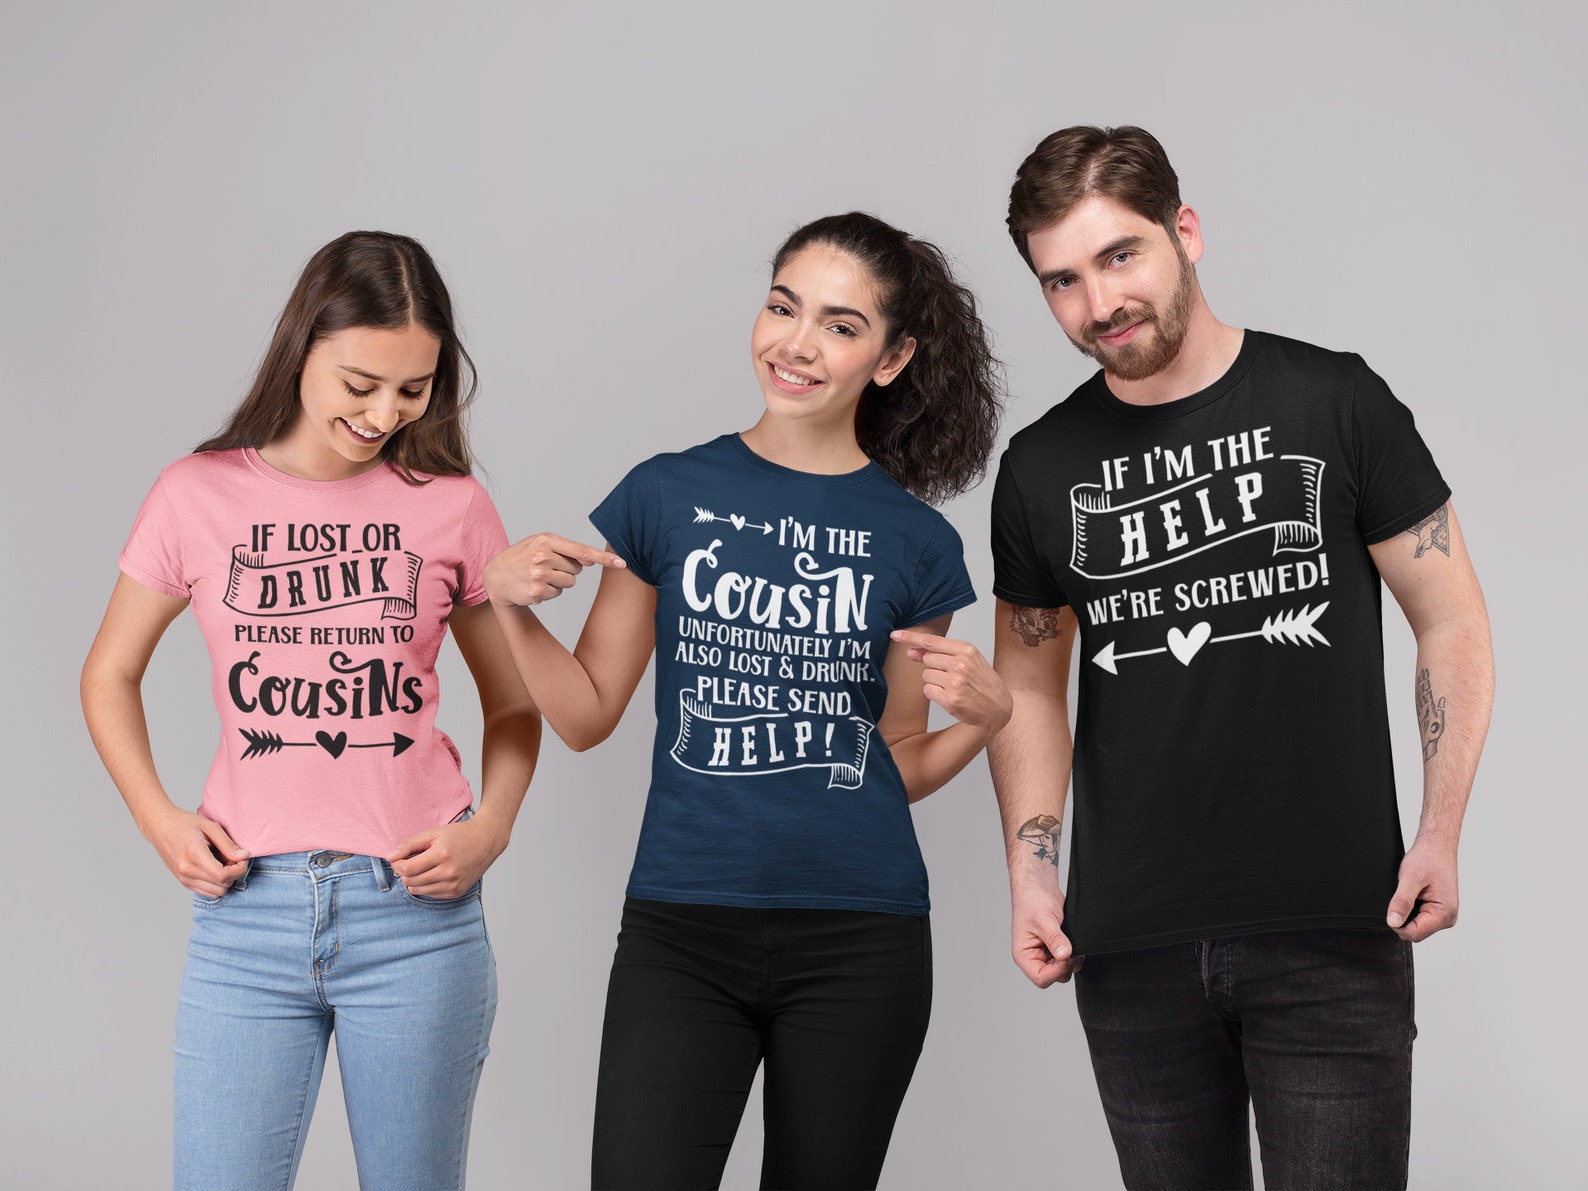 Funny Cousins Shirts If Lost or Drunk Please Return to - Etsy